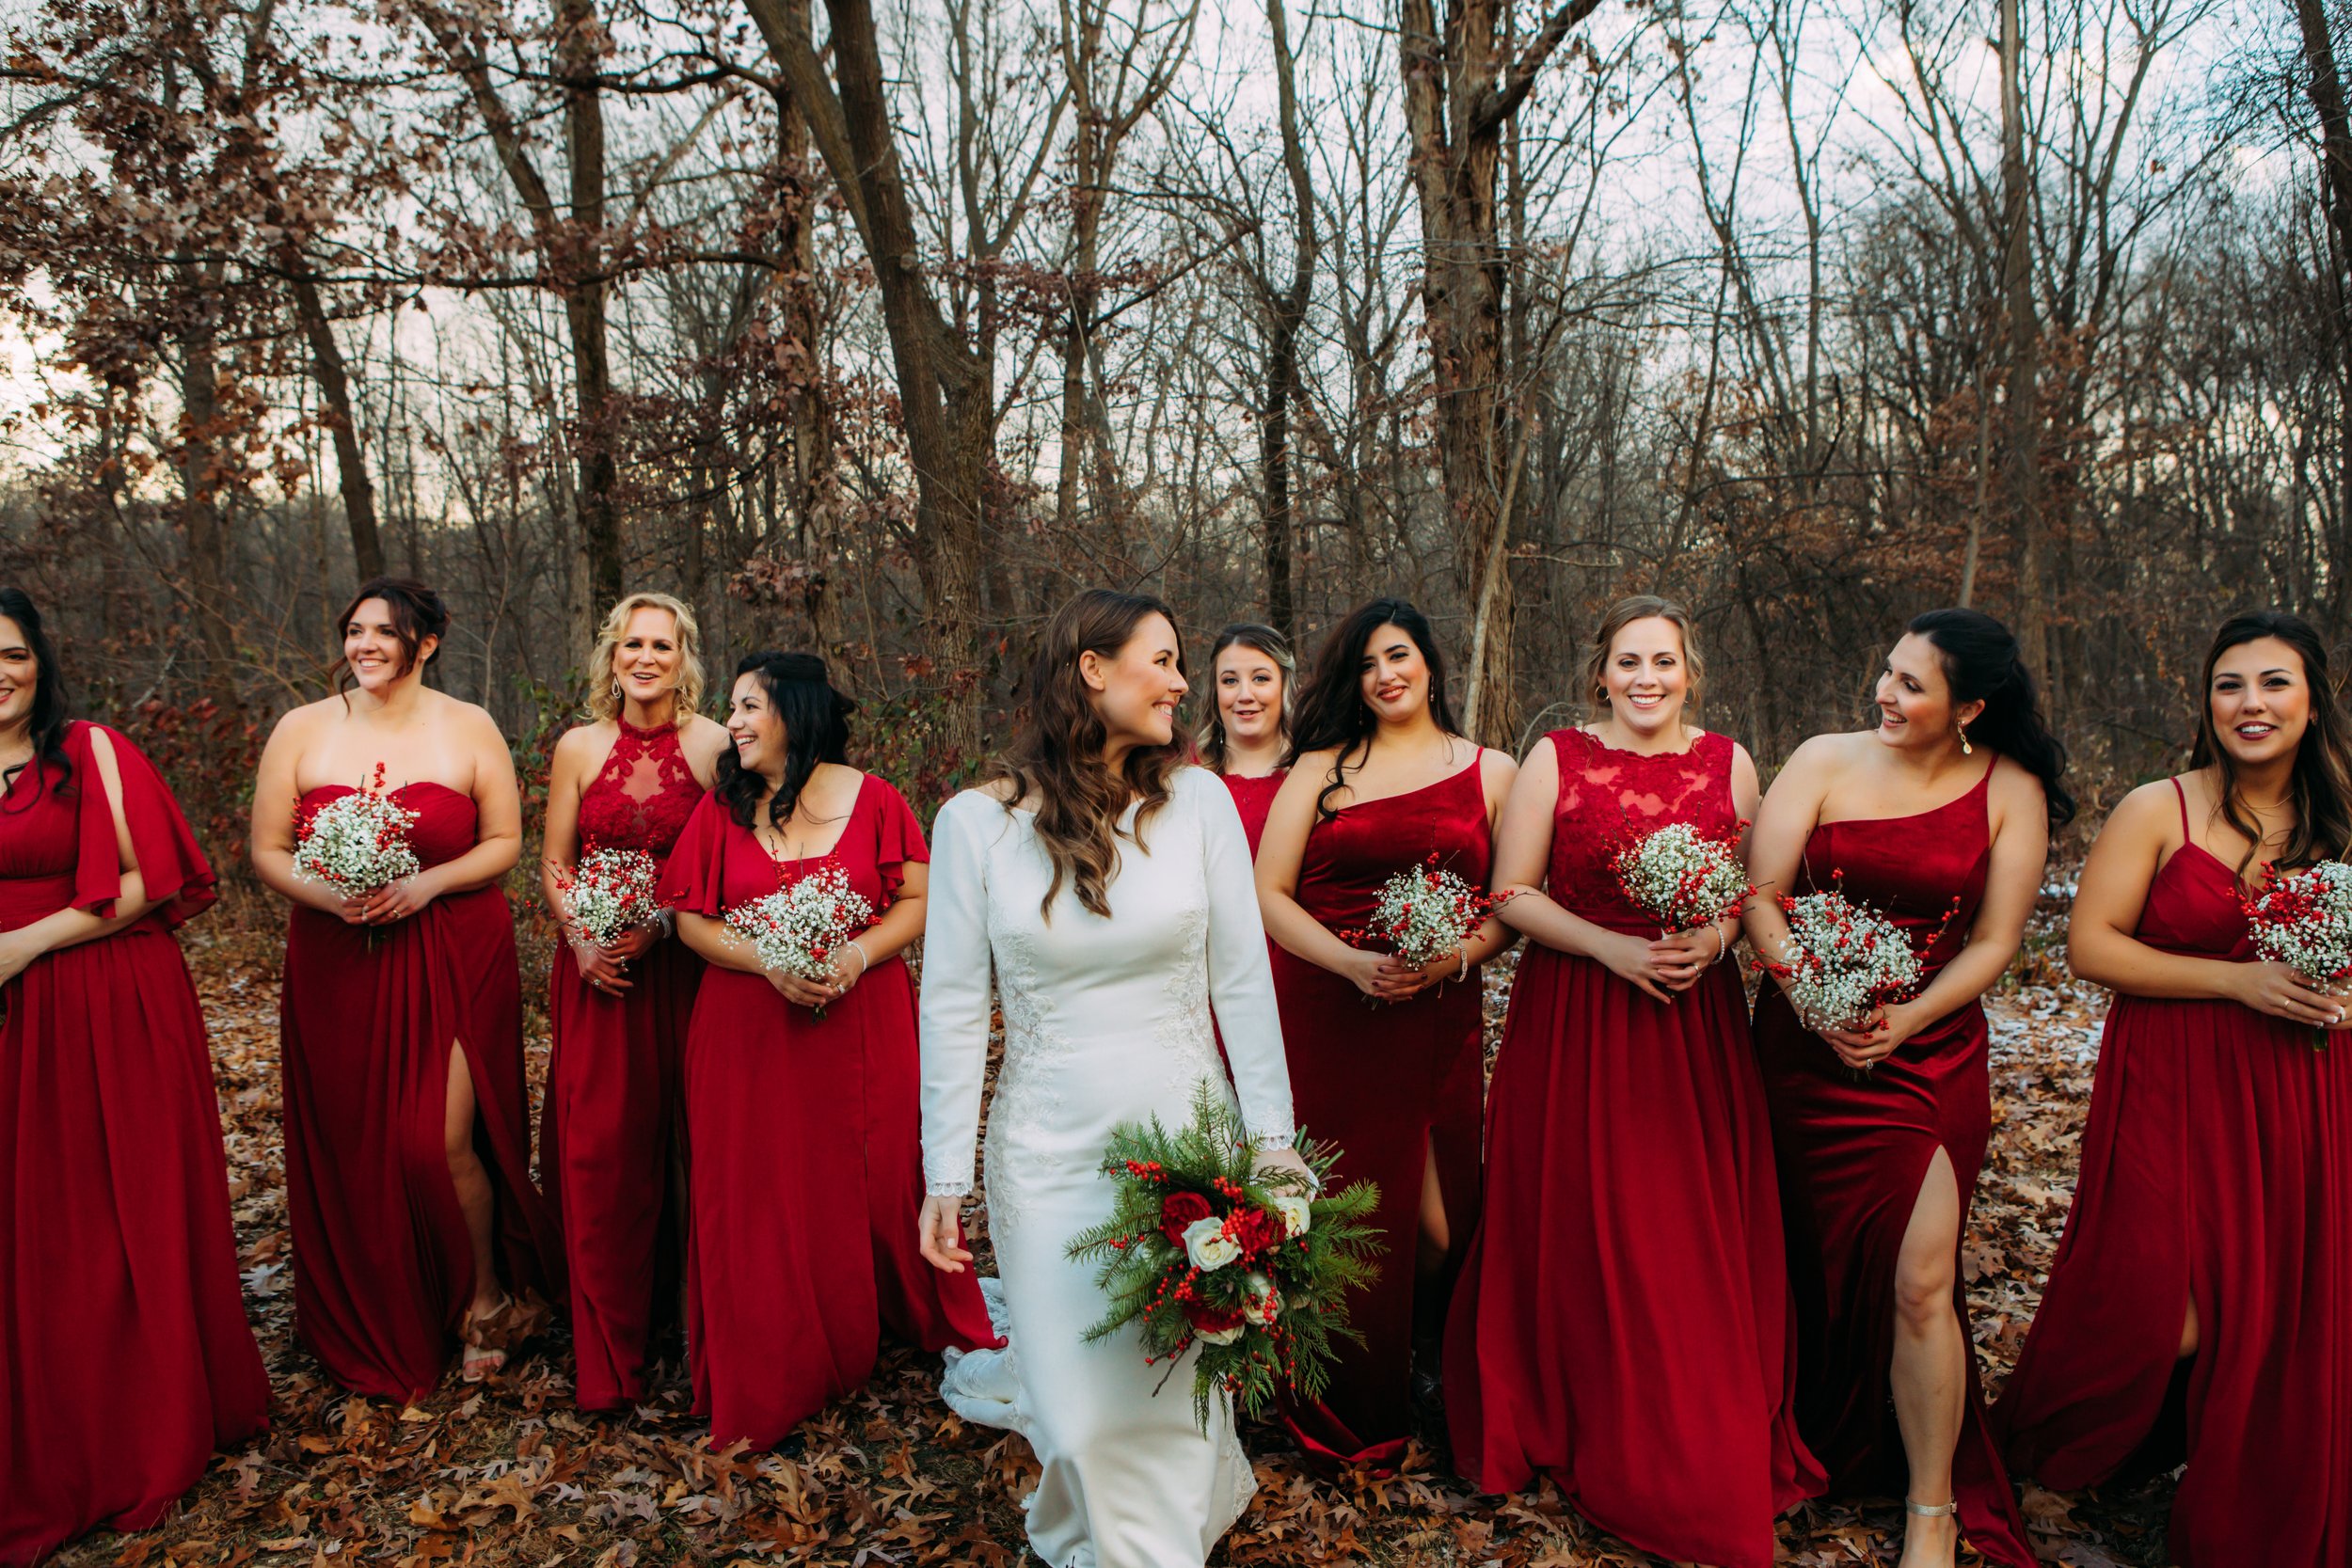  Teala Ward Photography captures the bridesmaids laughing in their red gowns with the bride. red bridesmaid dress #TealaWardPhotography #TealaWardWeddings #LaSalleWedding #churchwedding #Illinoisweddingphotographer #LaSalle,IL 